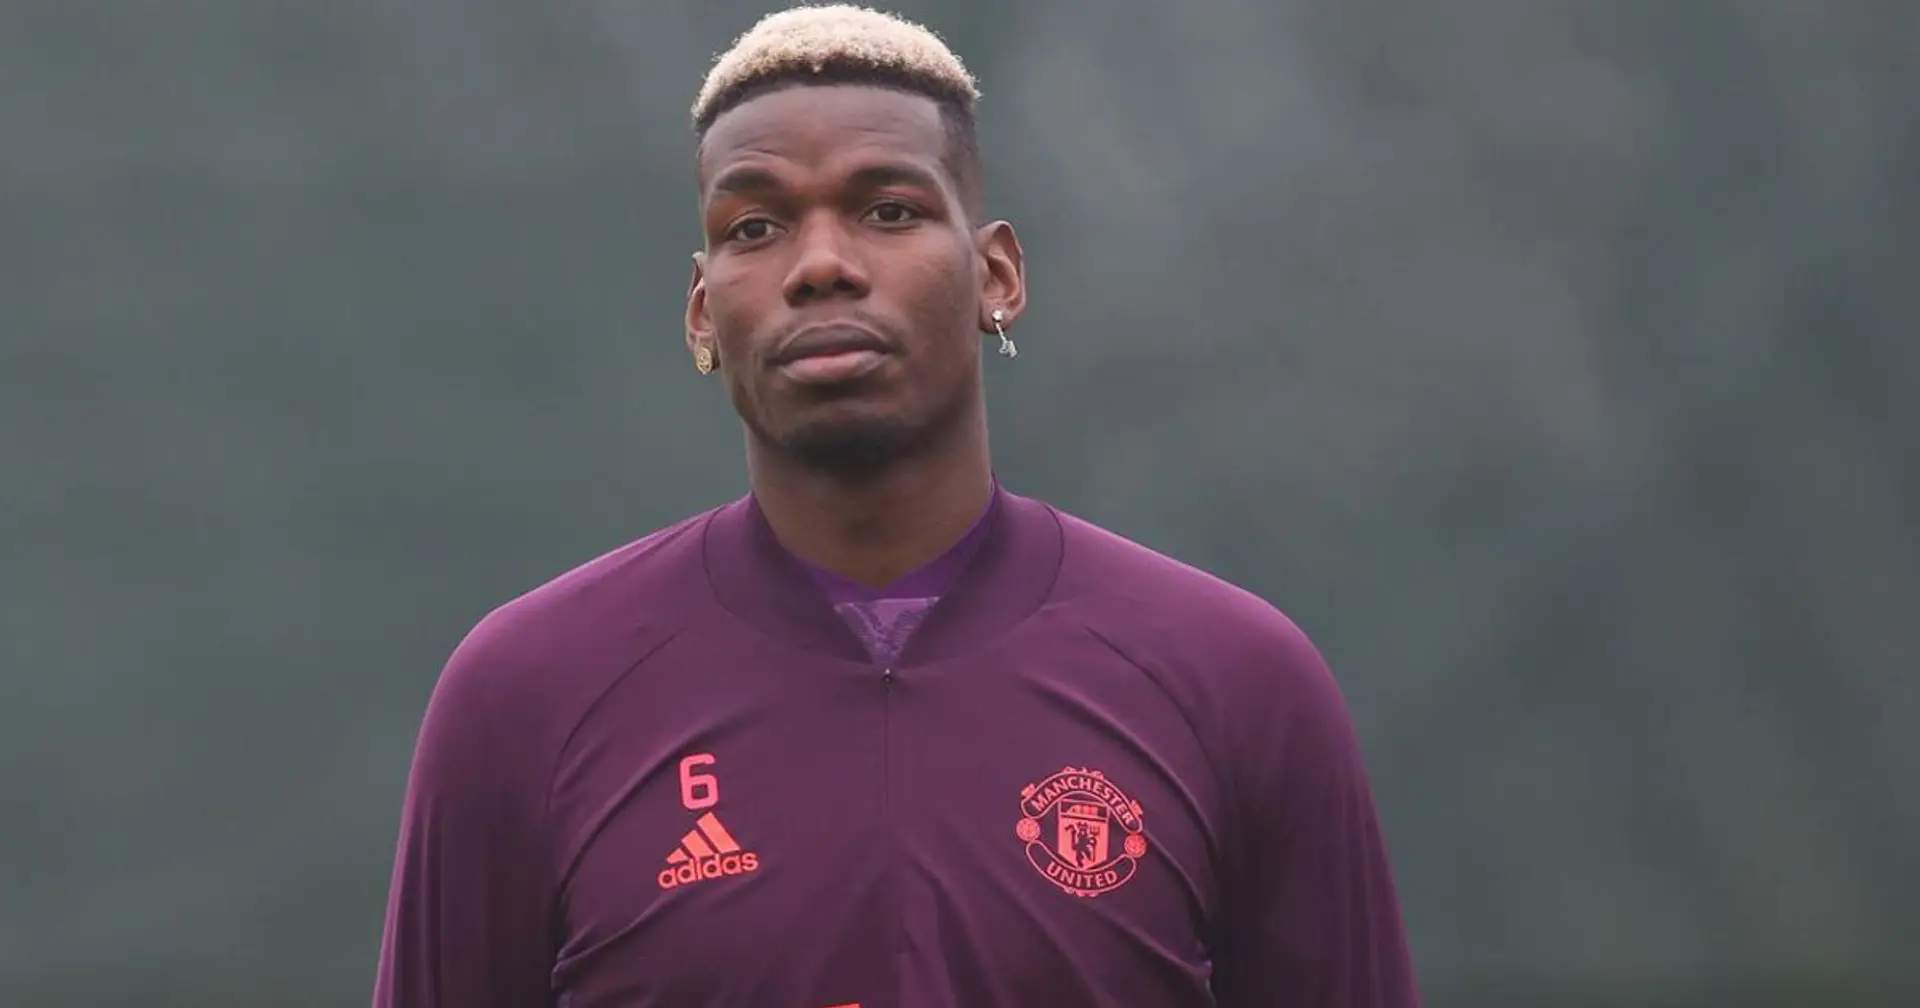 United rejected possible swap deal offer from Juventus for Pogba in April – Fabrizio Romano